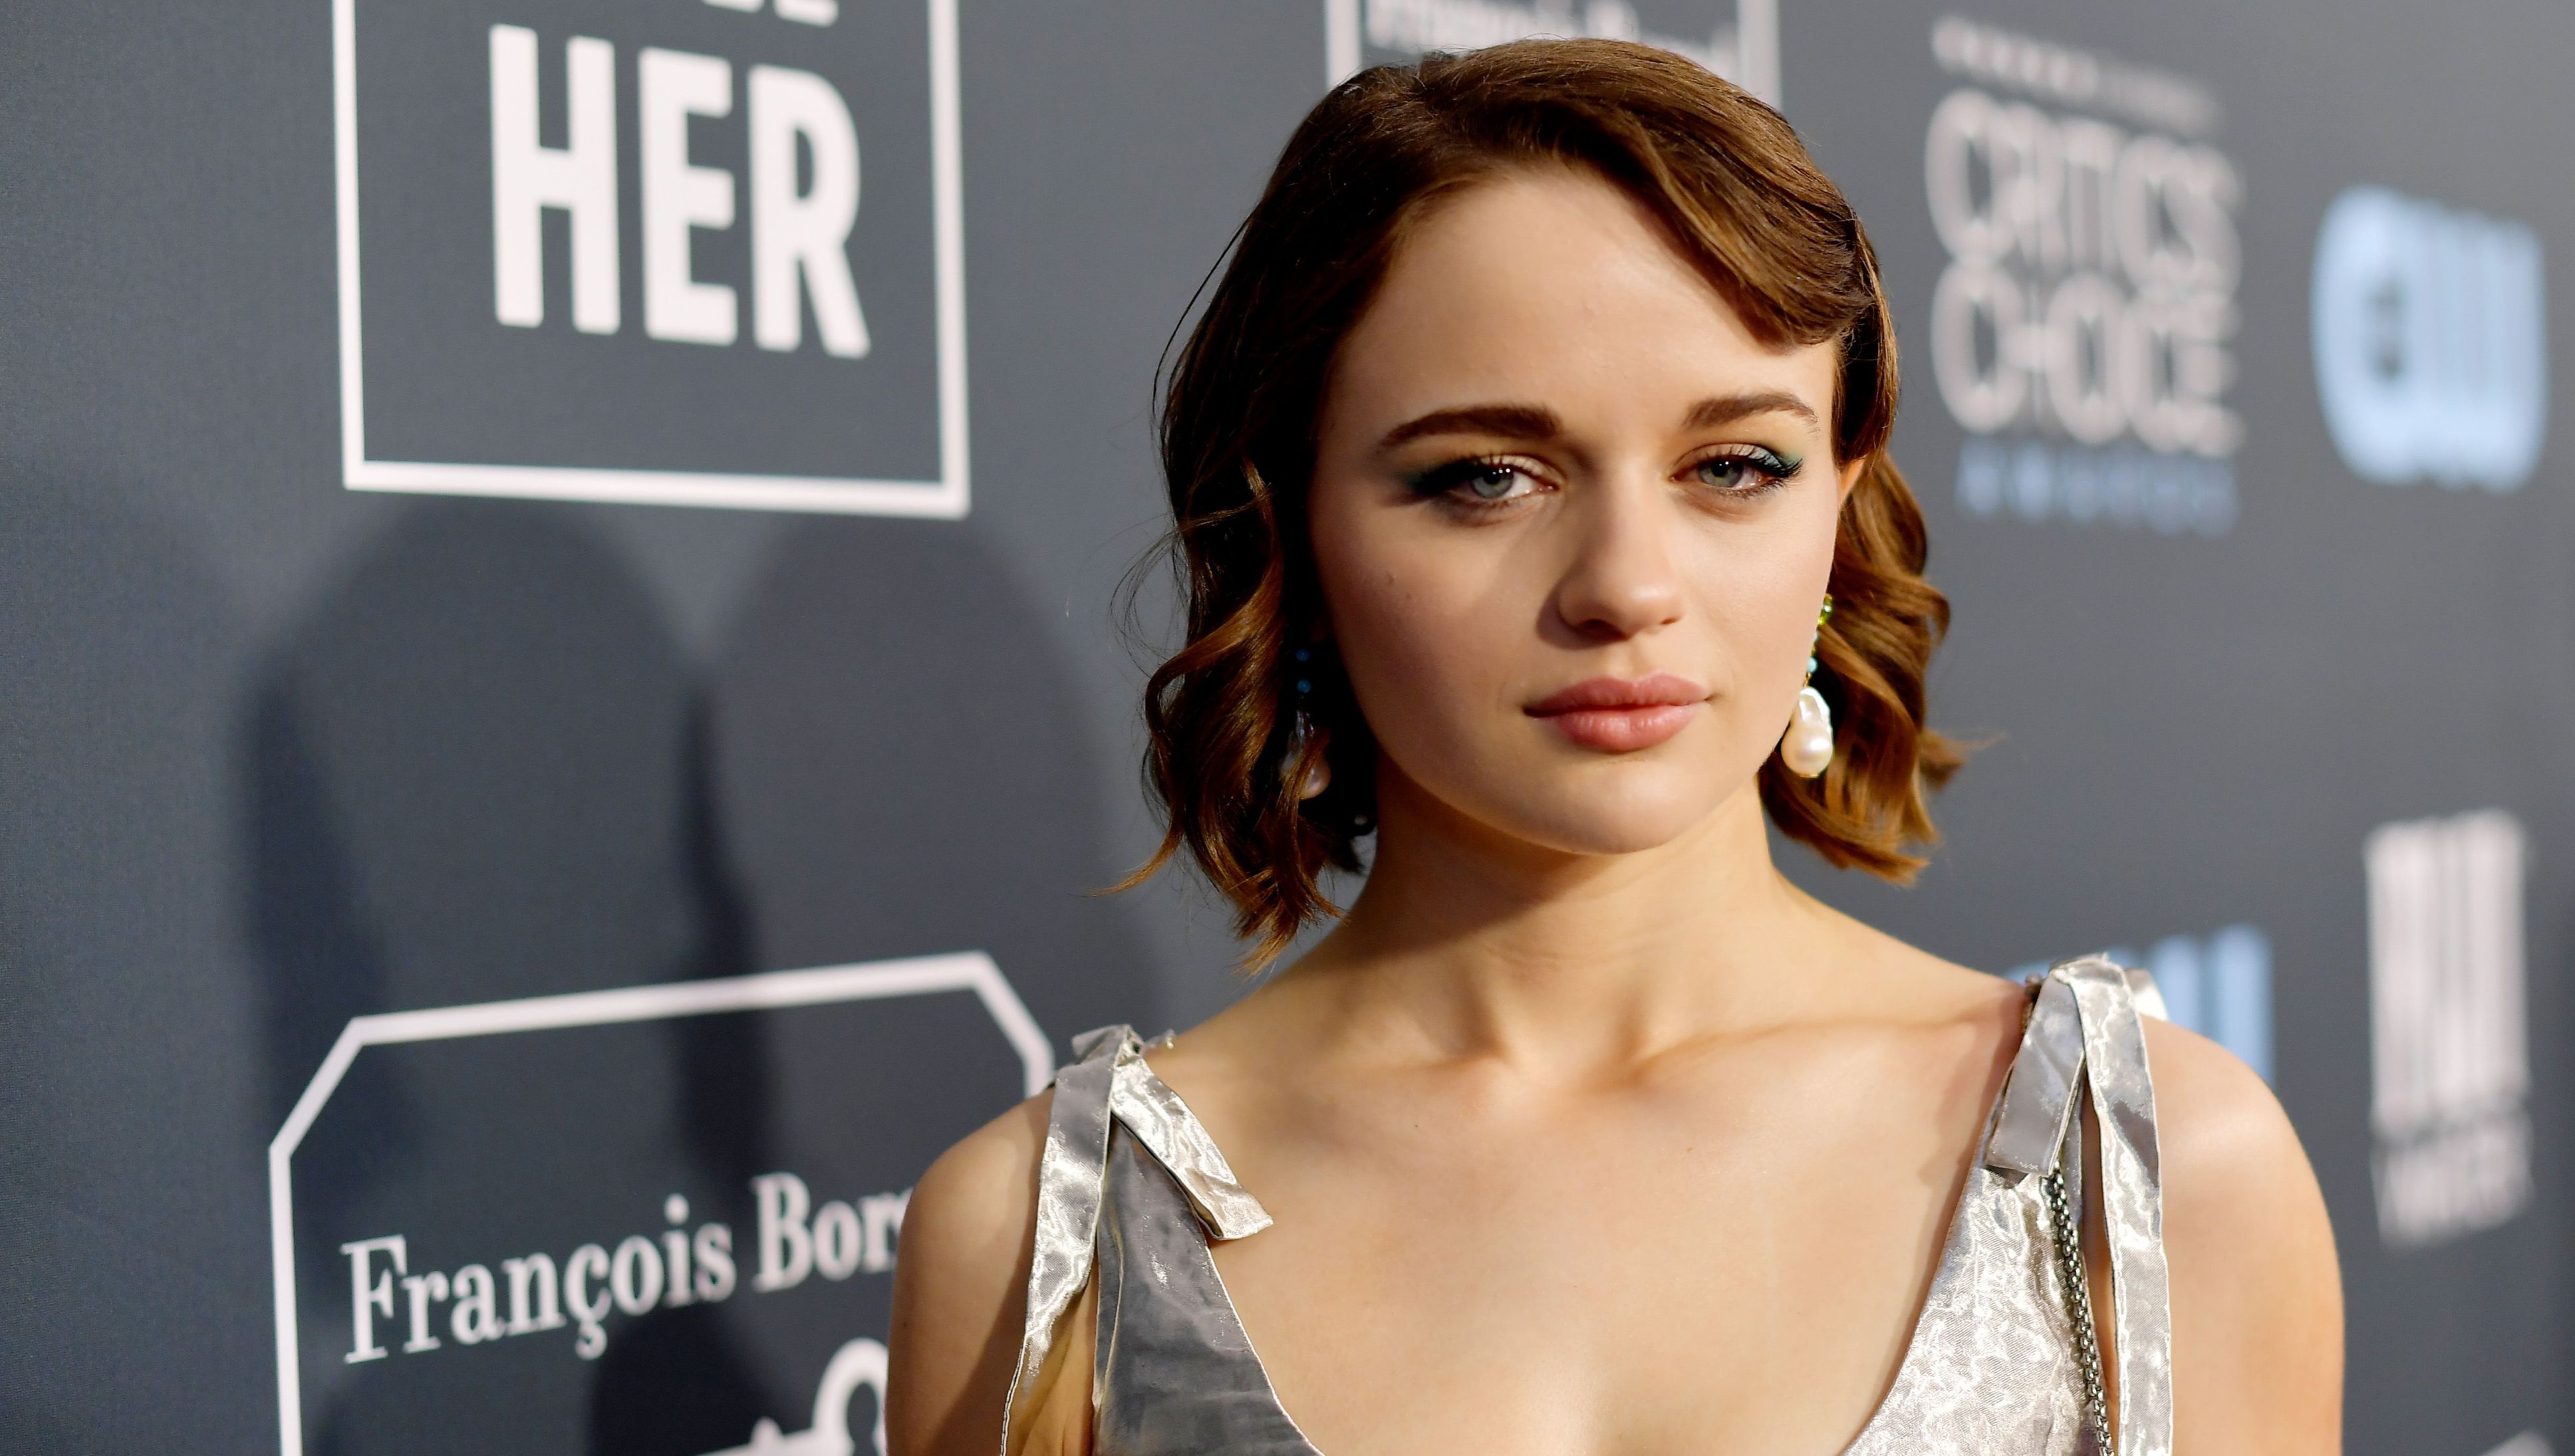 Joey King stares with short hair and a silver dress.